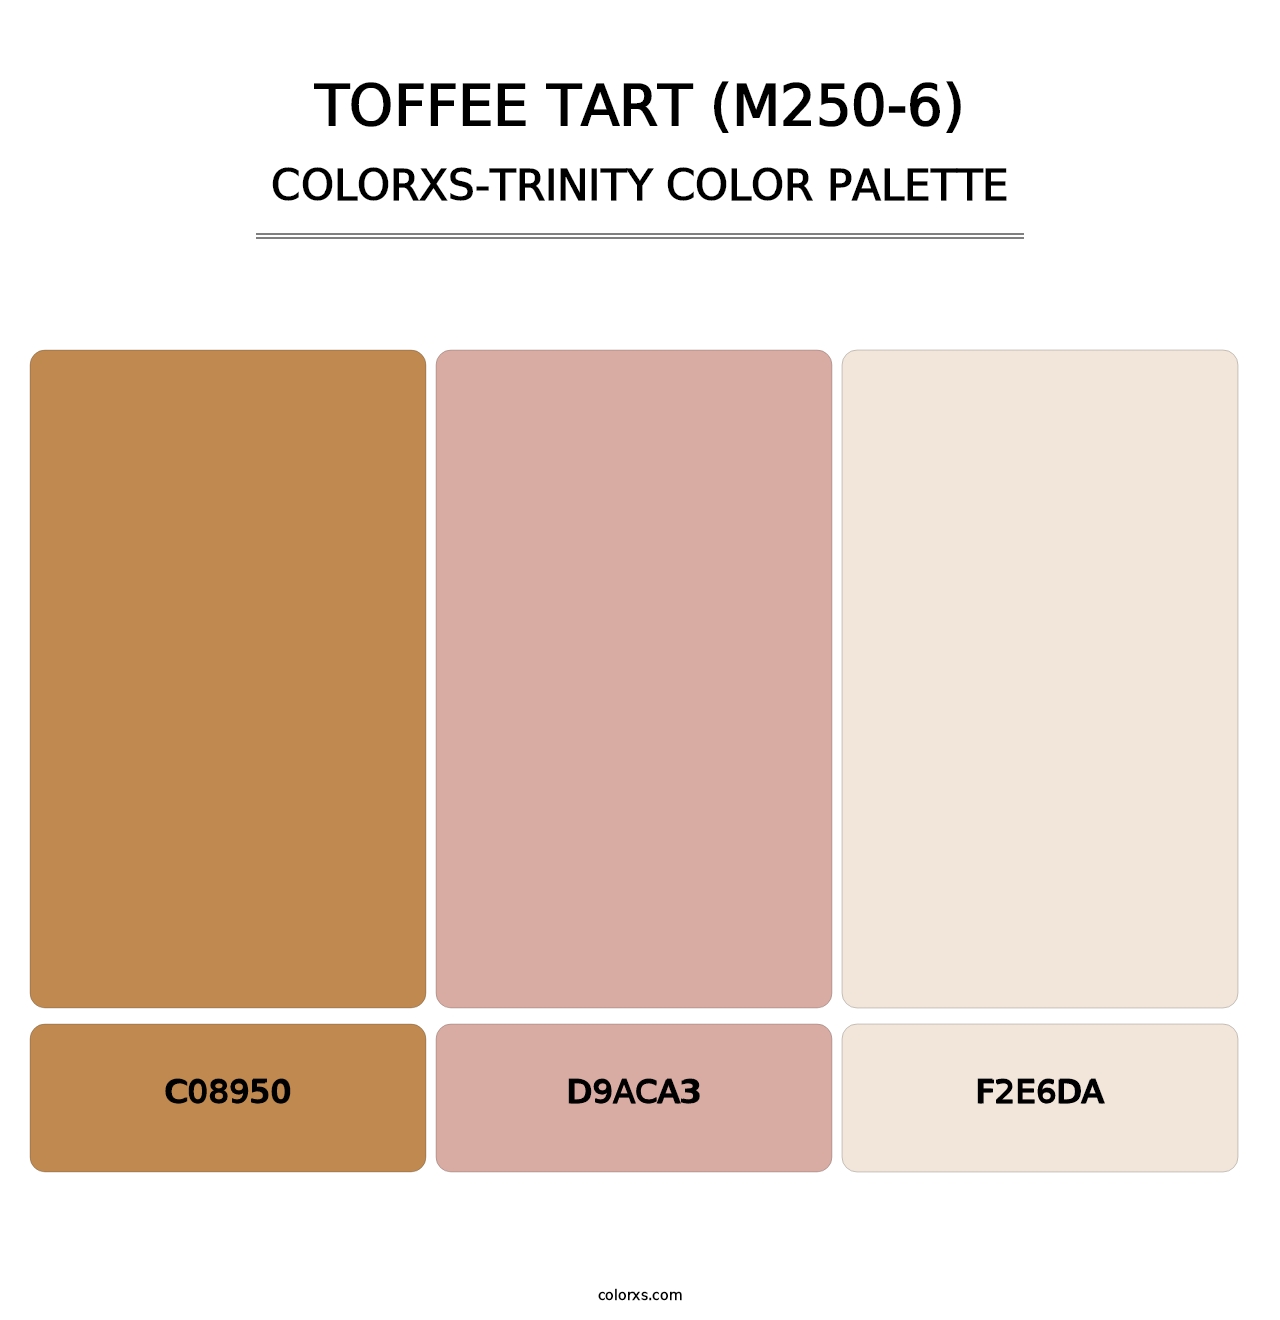 Toffee Tart (M250-6) - Colorxs Trinity Palette